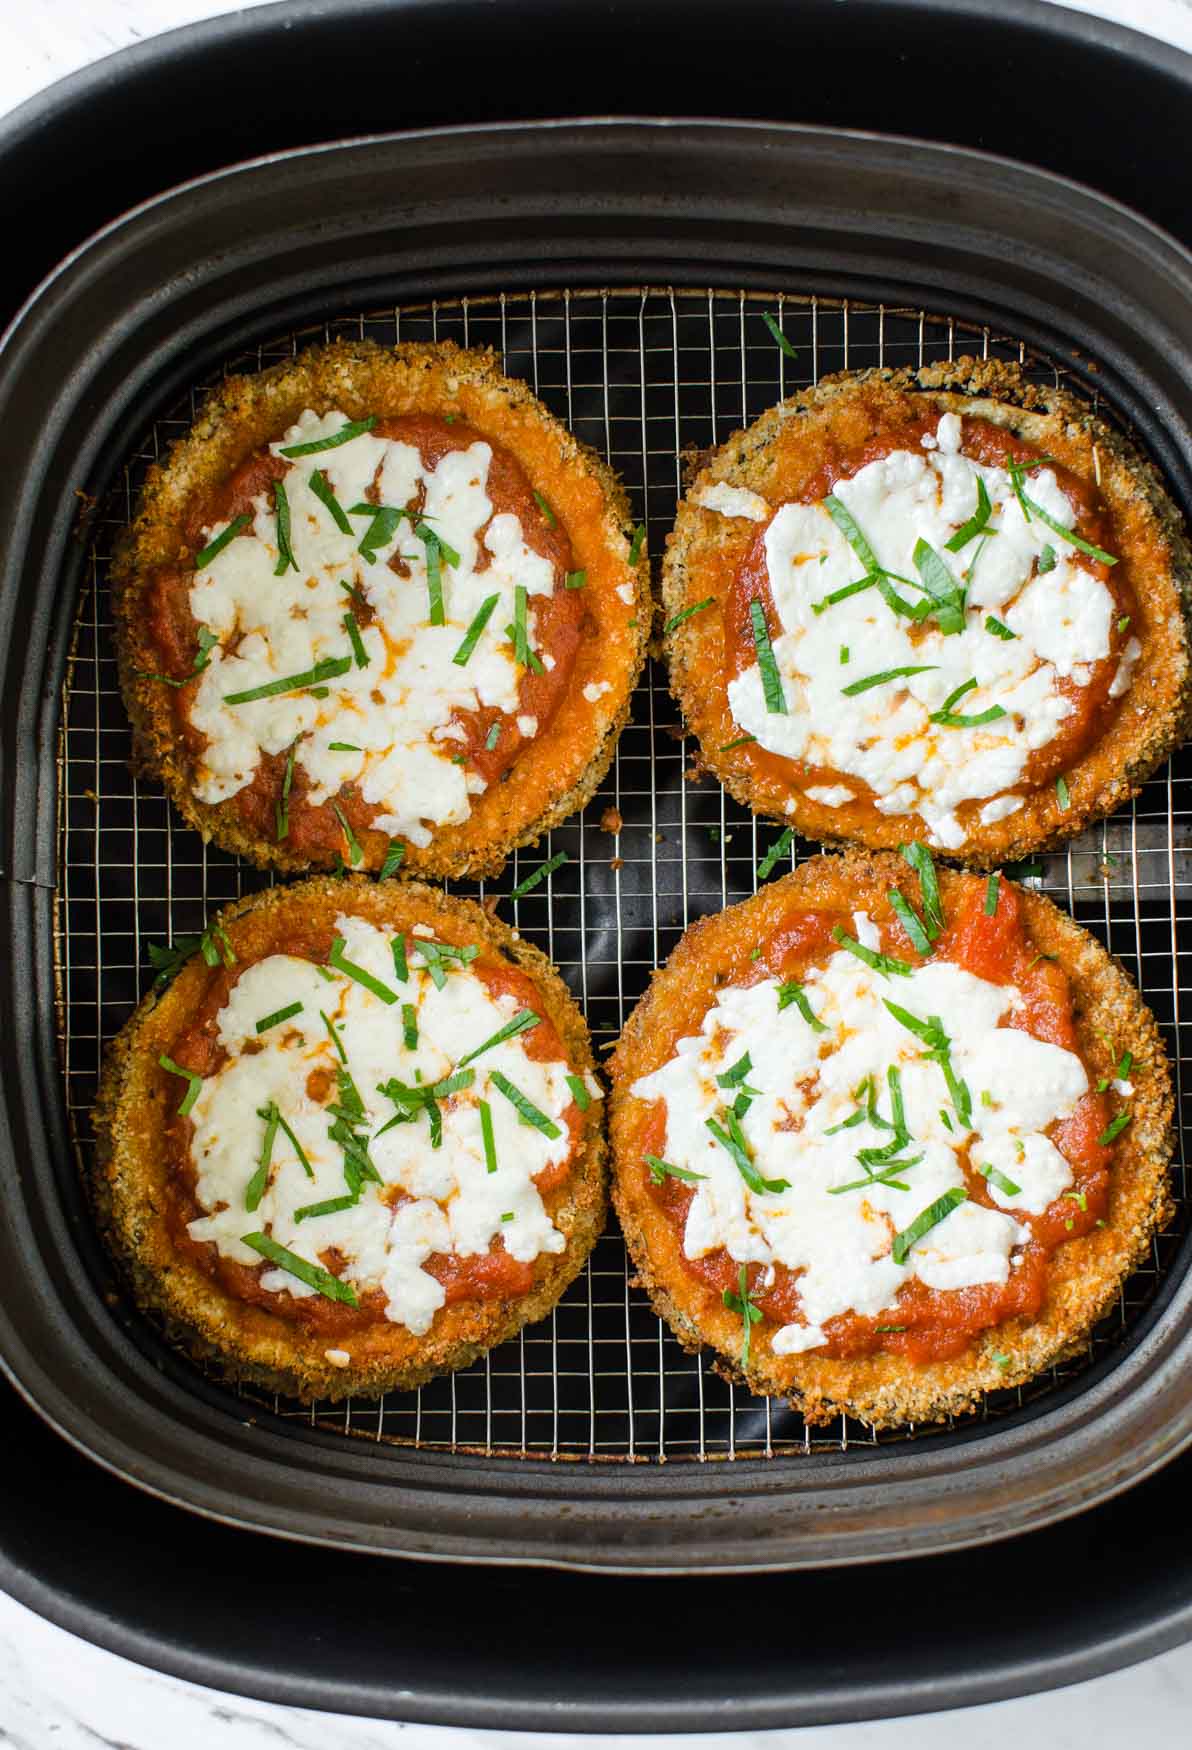 Air Fryer Eggplant Parmesan - Healthy and easy breaded eggplant slices fried in Air Fryer for the perfect crispy crust that exactly mimics the deep fried texture. Learn tips for perfect & mess free coating the eggplant. |#watchwhatueat #healthyrecipes #eggplant #eggplantparmesan #airfryer